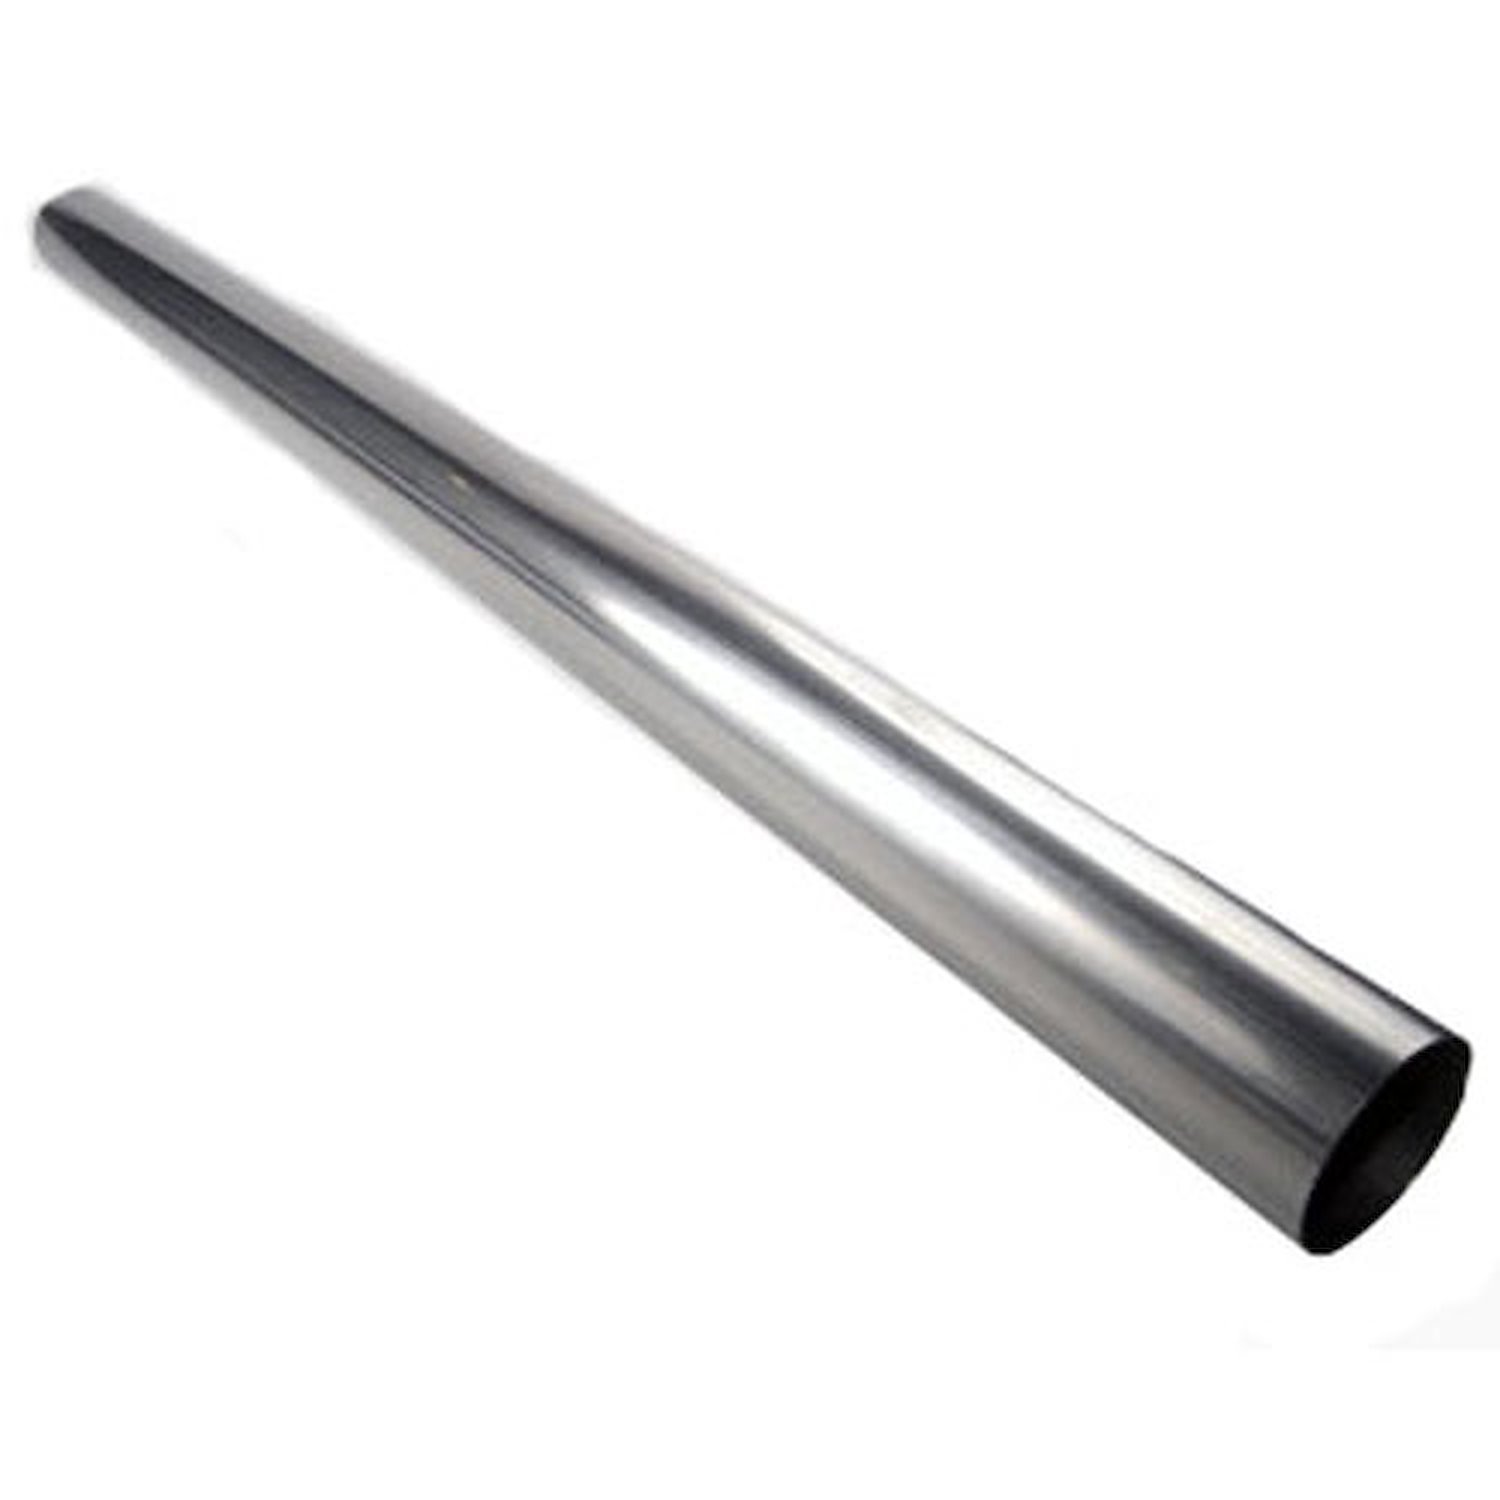 T409 Stainless Exhaust Tubing 2.50" OD x 7.5" L